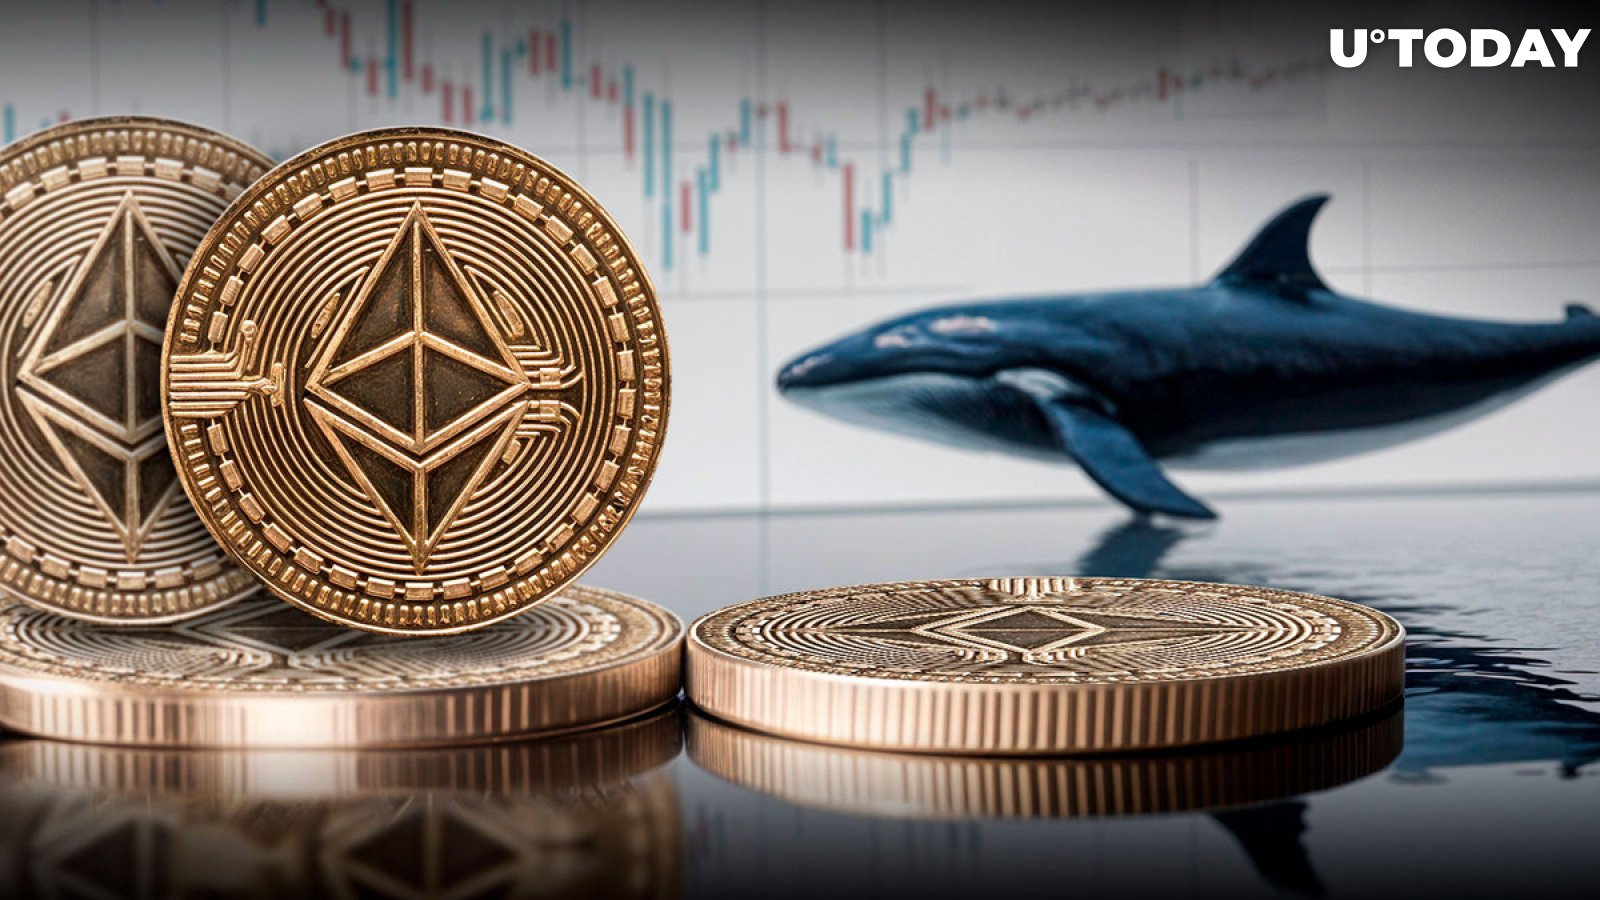 Ethereum (ETH) Whales Make $32 Million Move - What's Happening?